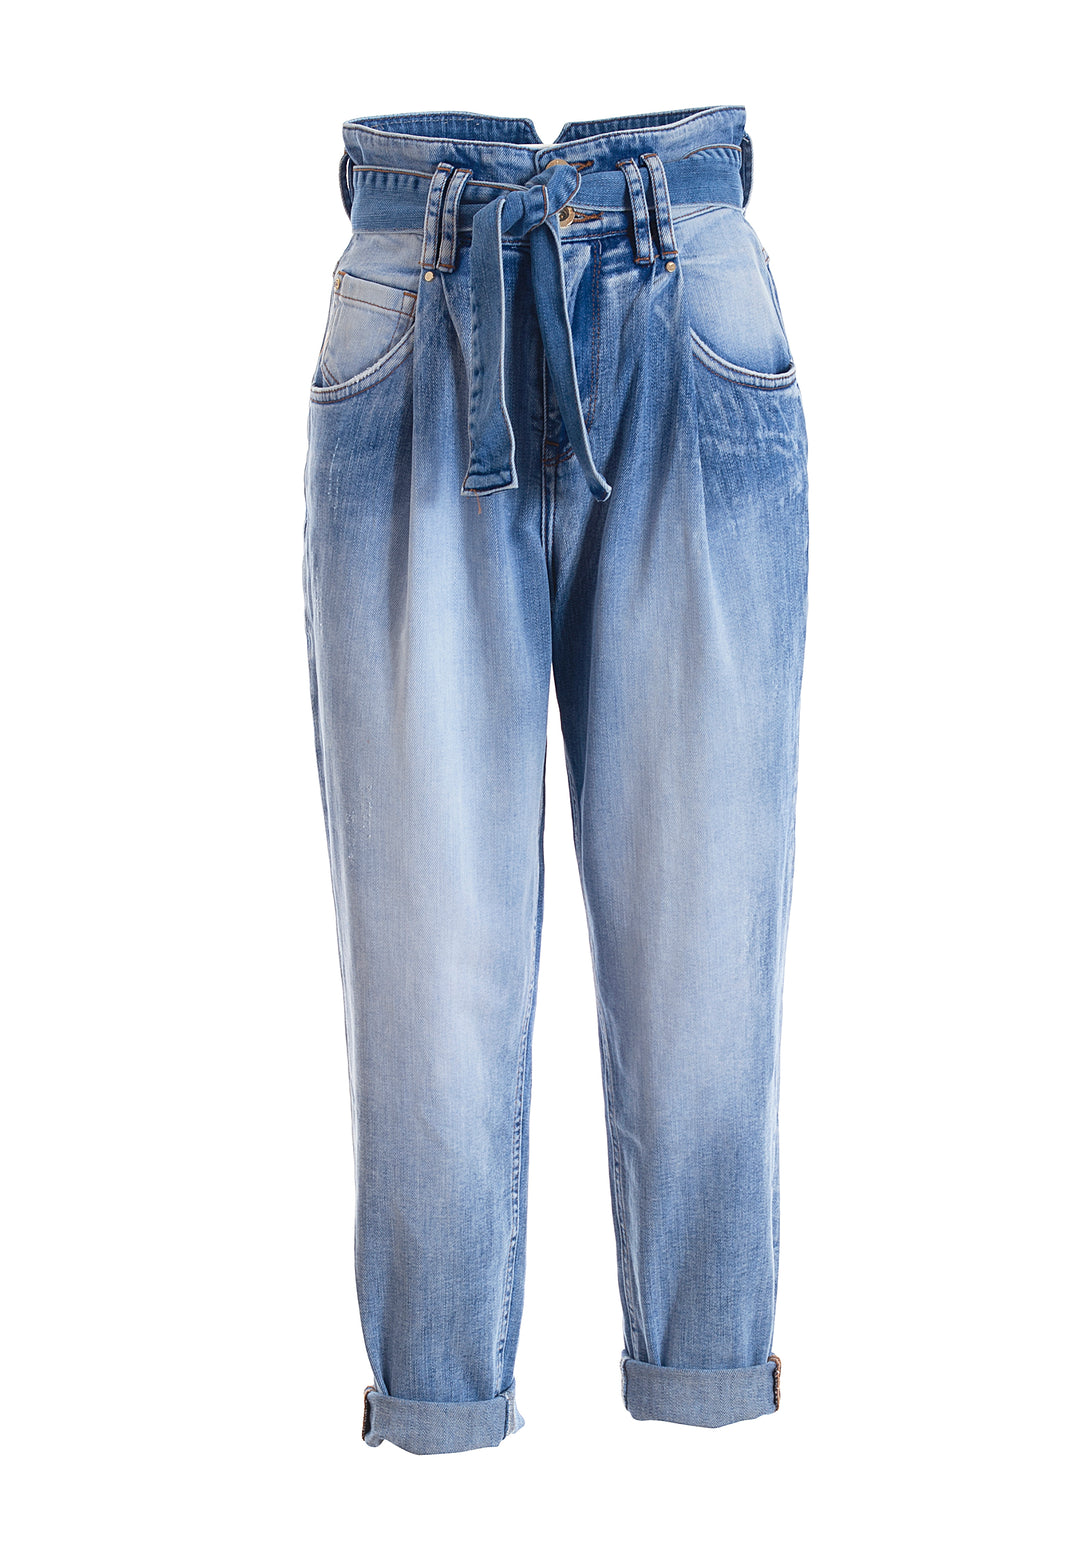 Jeans carrot fit made in stretch denim with light bleached wash